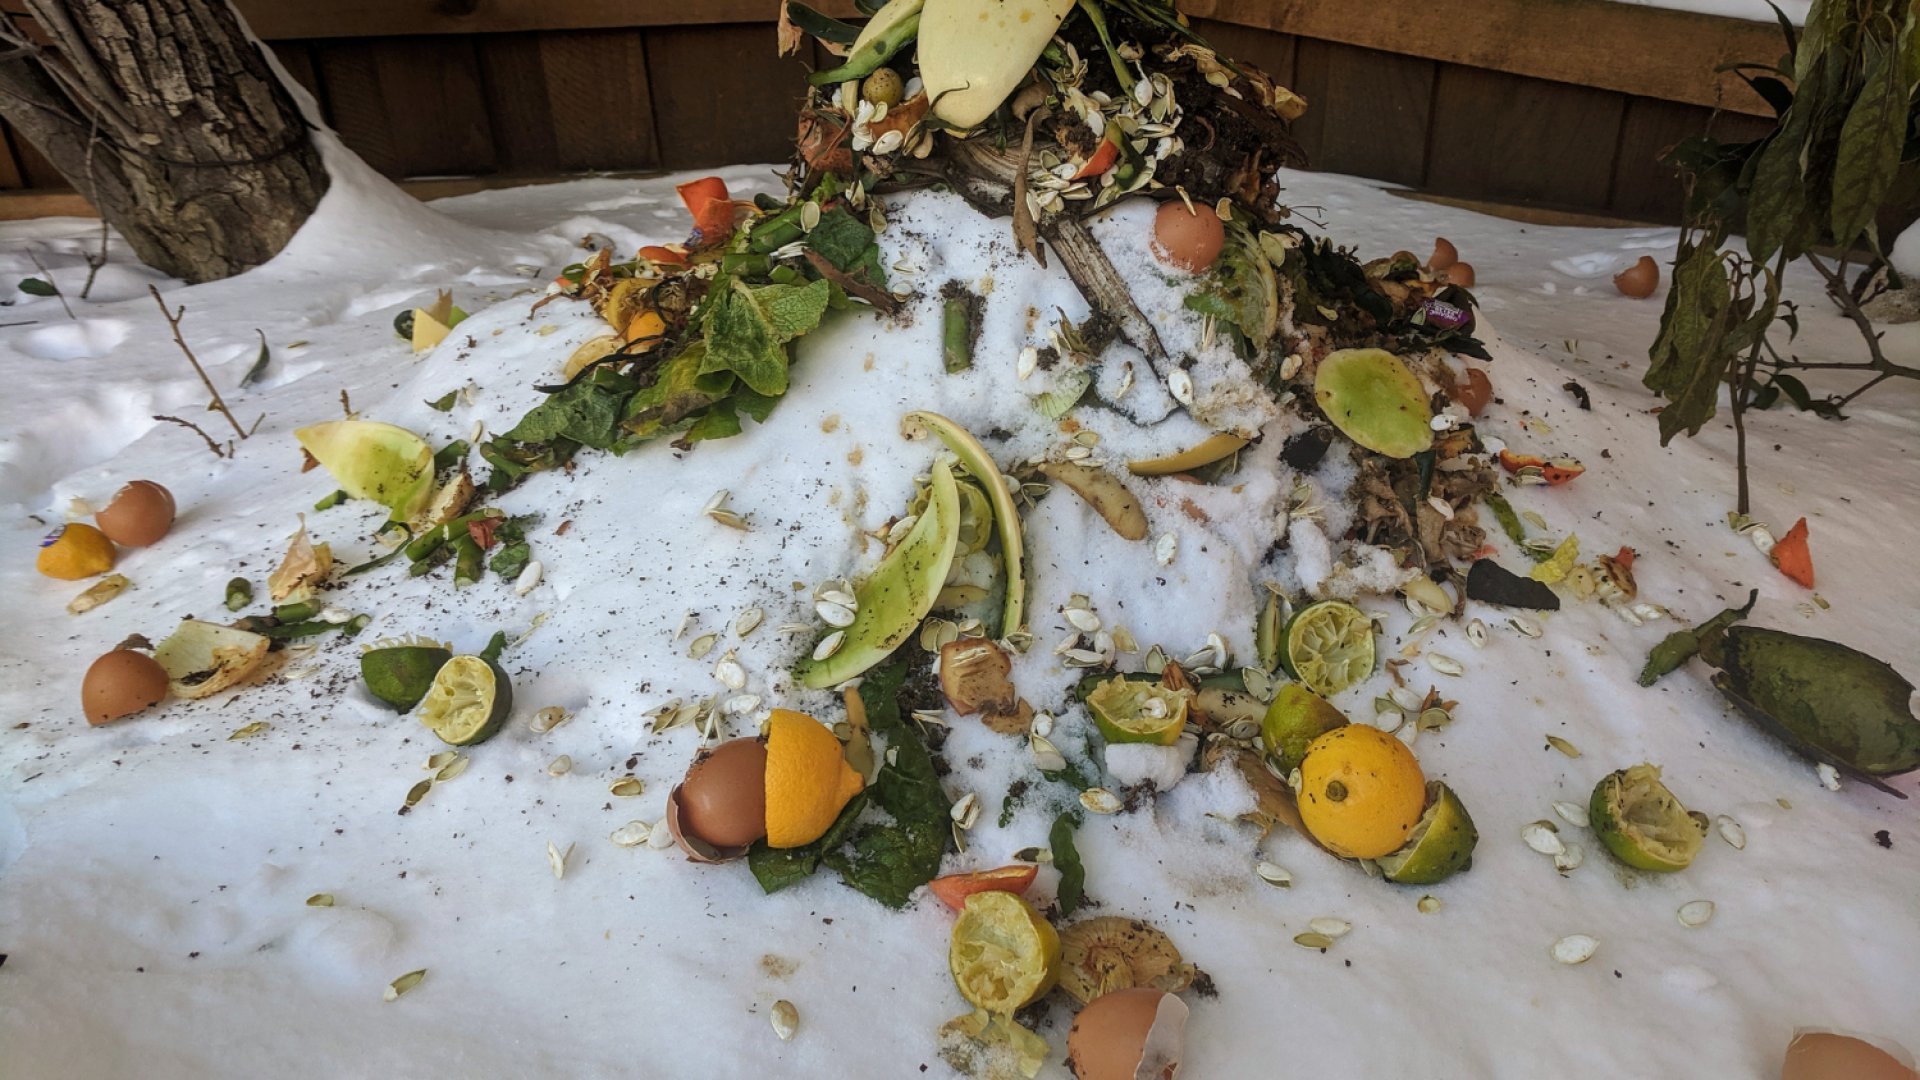 Composting in Winter: The Best How-To Guide